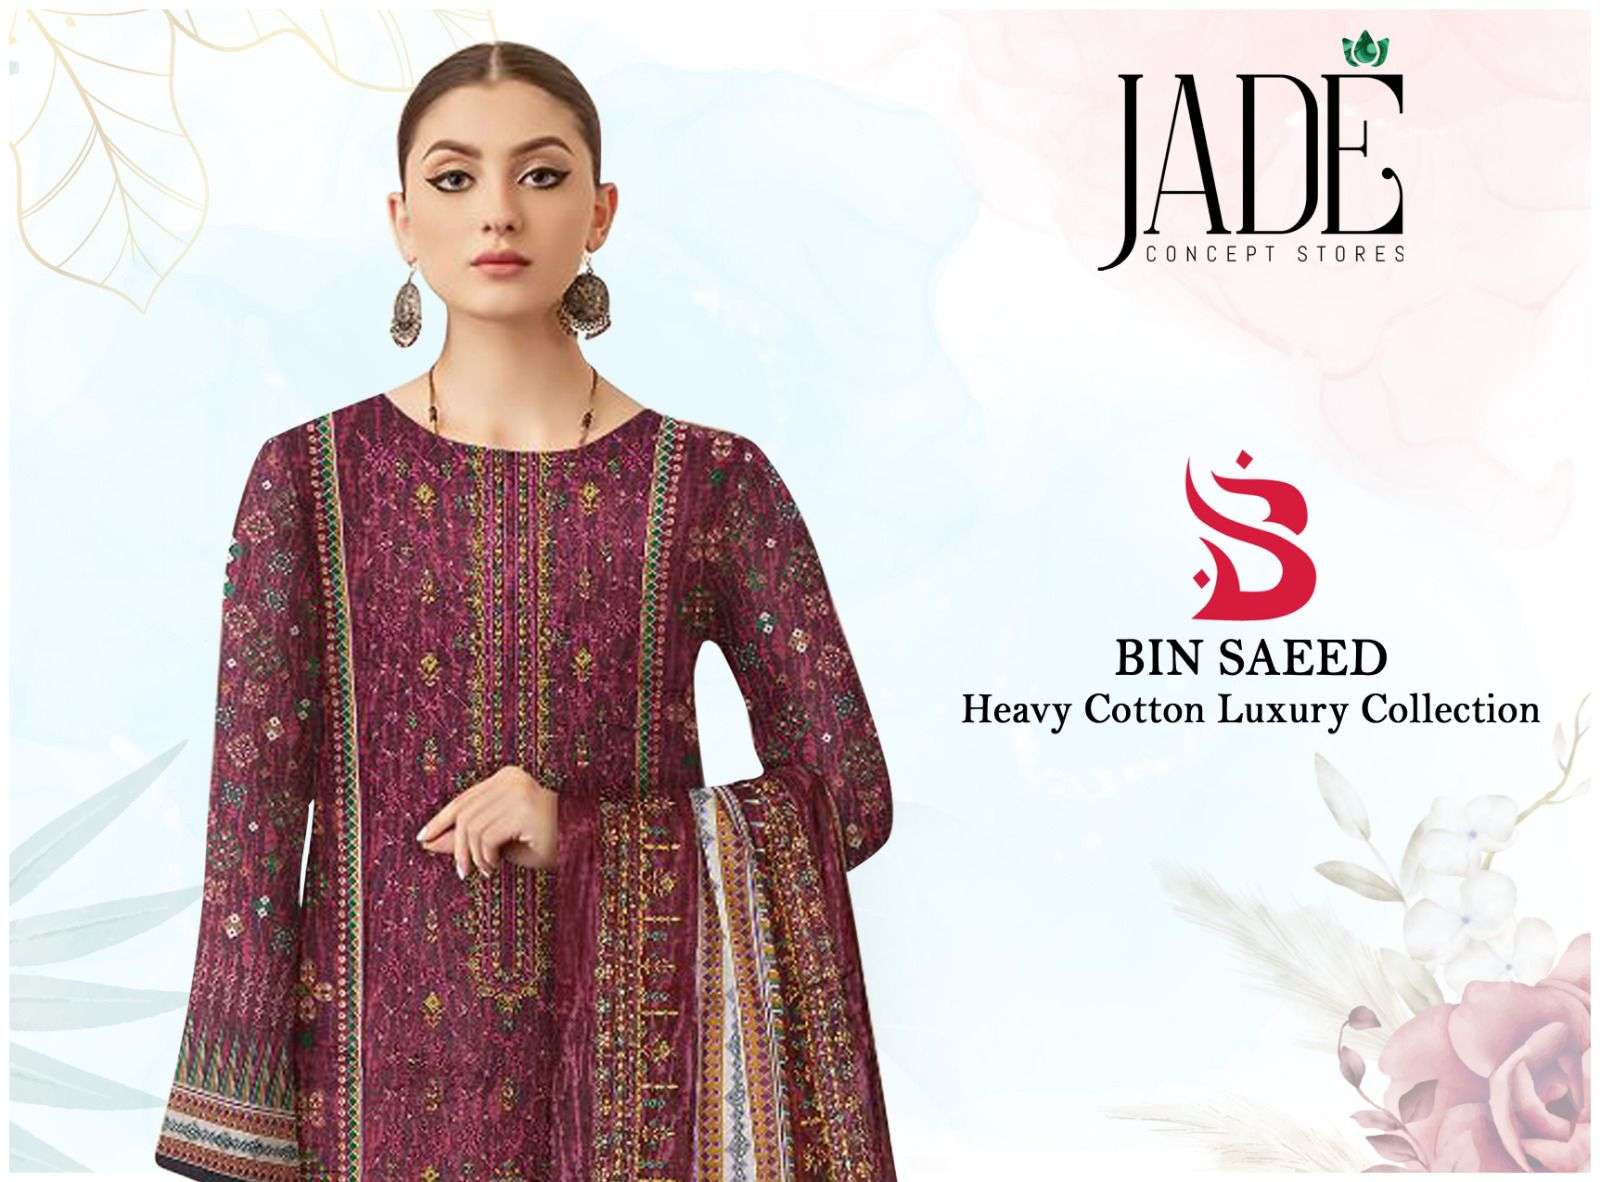 jade bin saeed heavy cotton luxury collection series 101-106 lawn cotton suit 